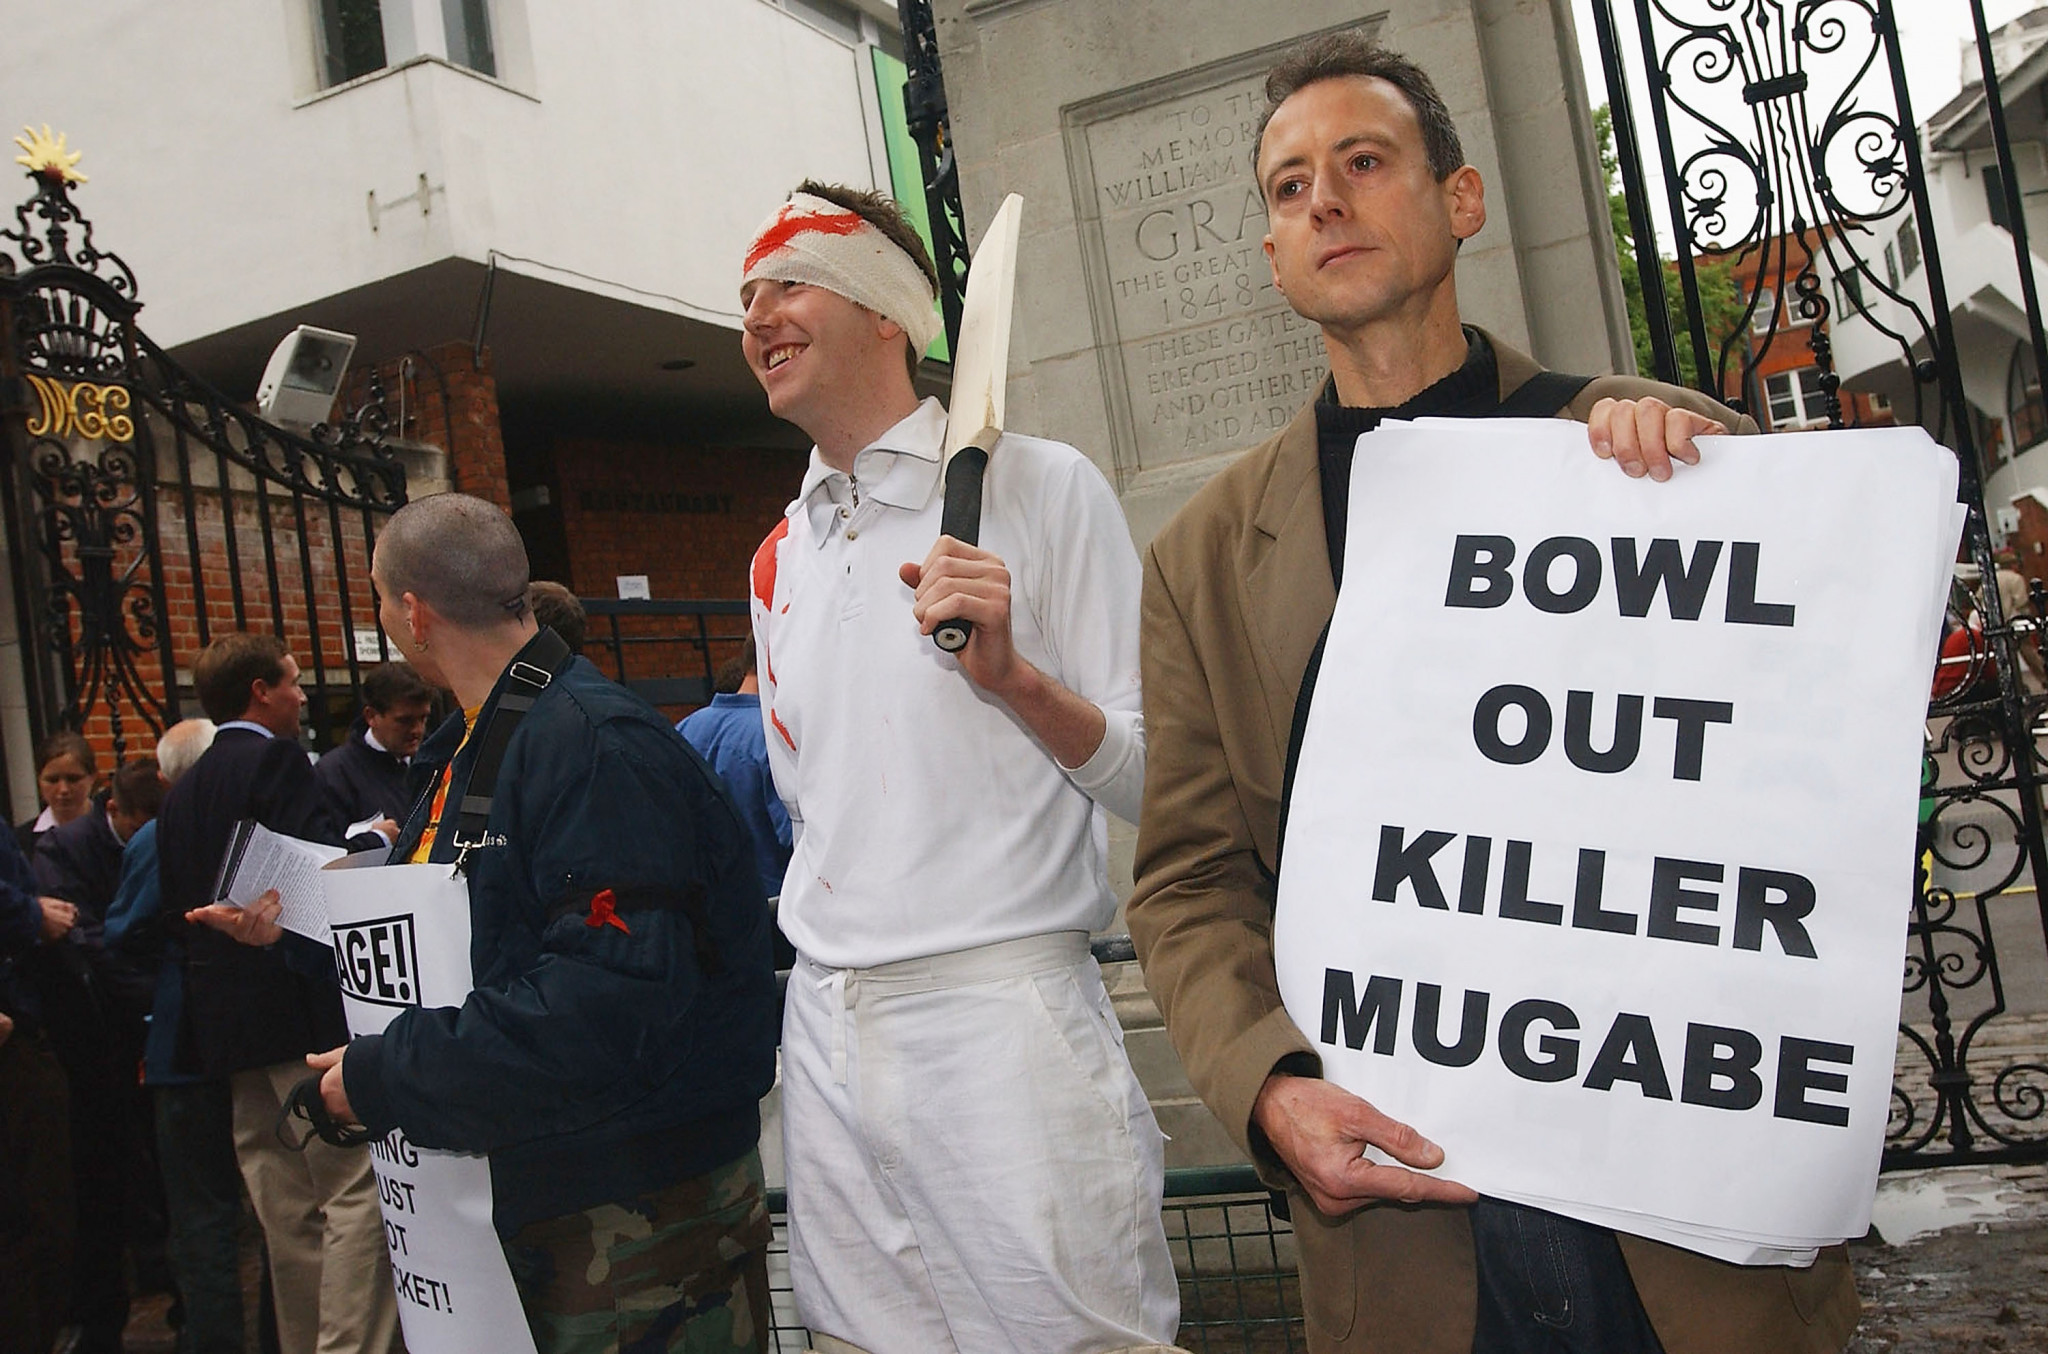 Activist Peter Tatchell, right, was amongst protesters against Robert Mugabe's regime and has also protested in Qatar this week ©Getty Images